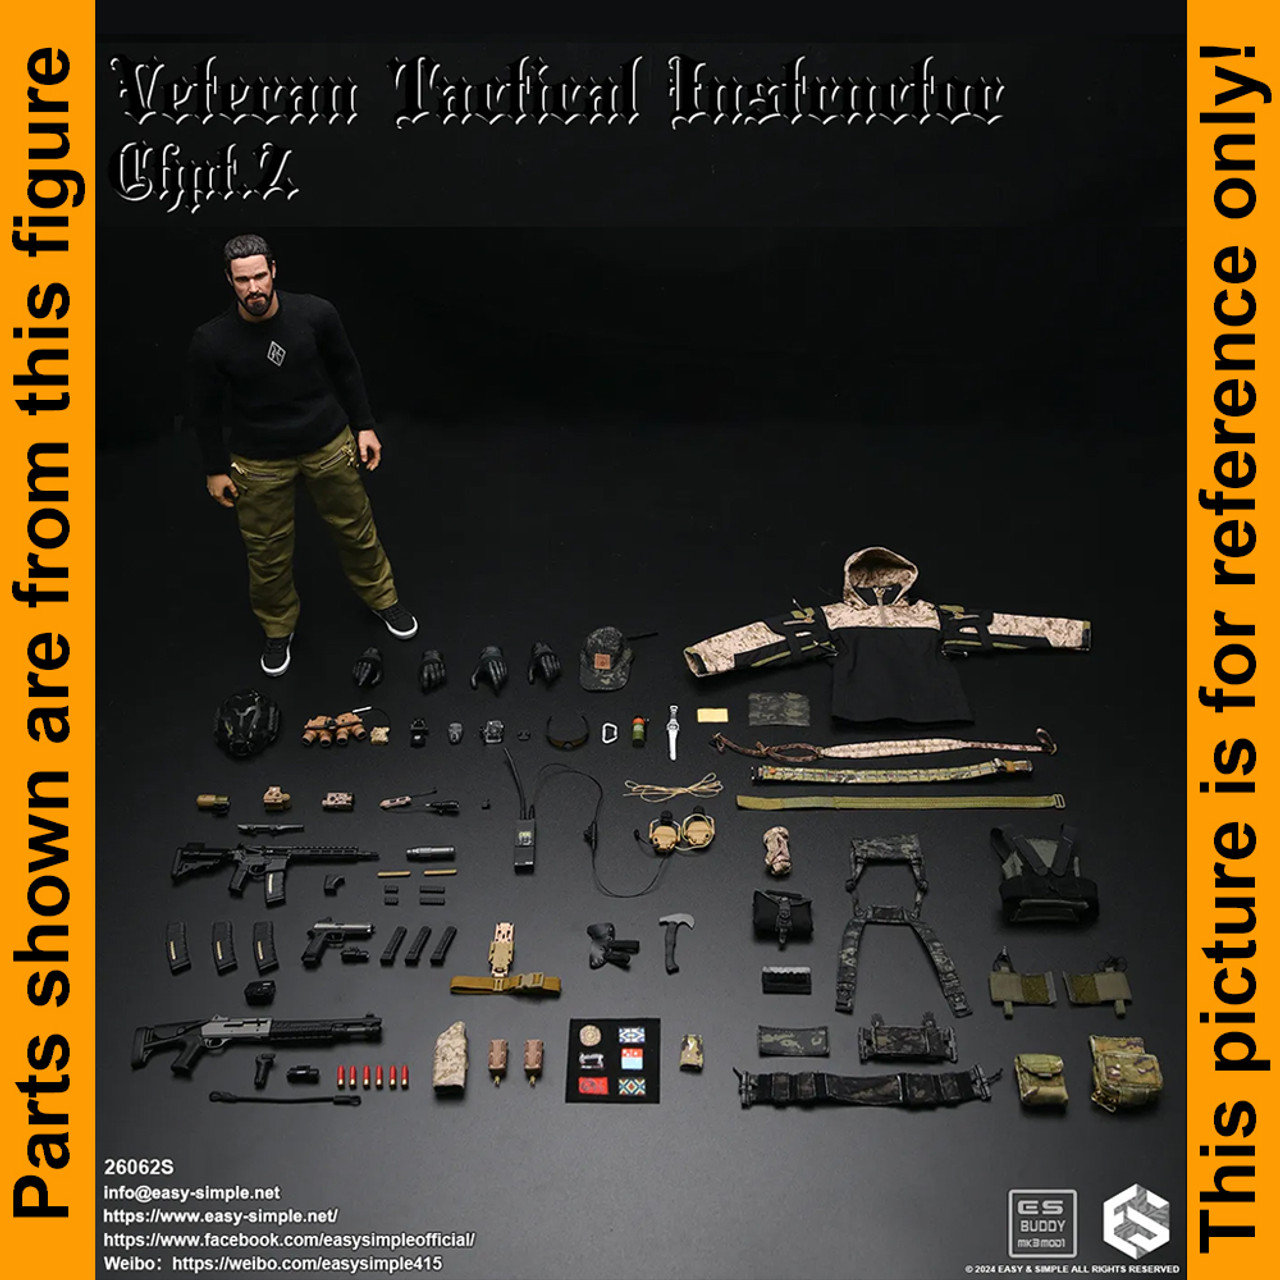 S Tactical Instructor Chpt 2 - Sunglasses - 1/6 Scale